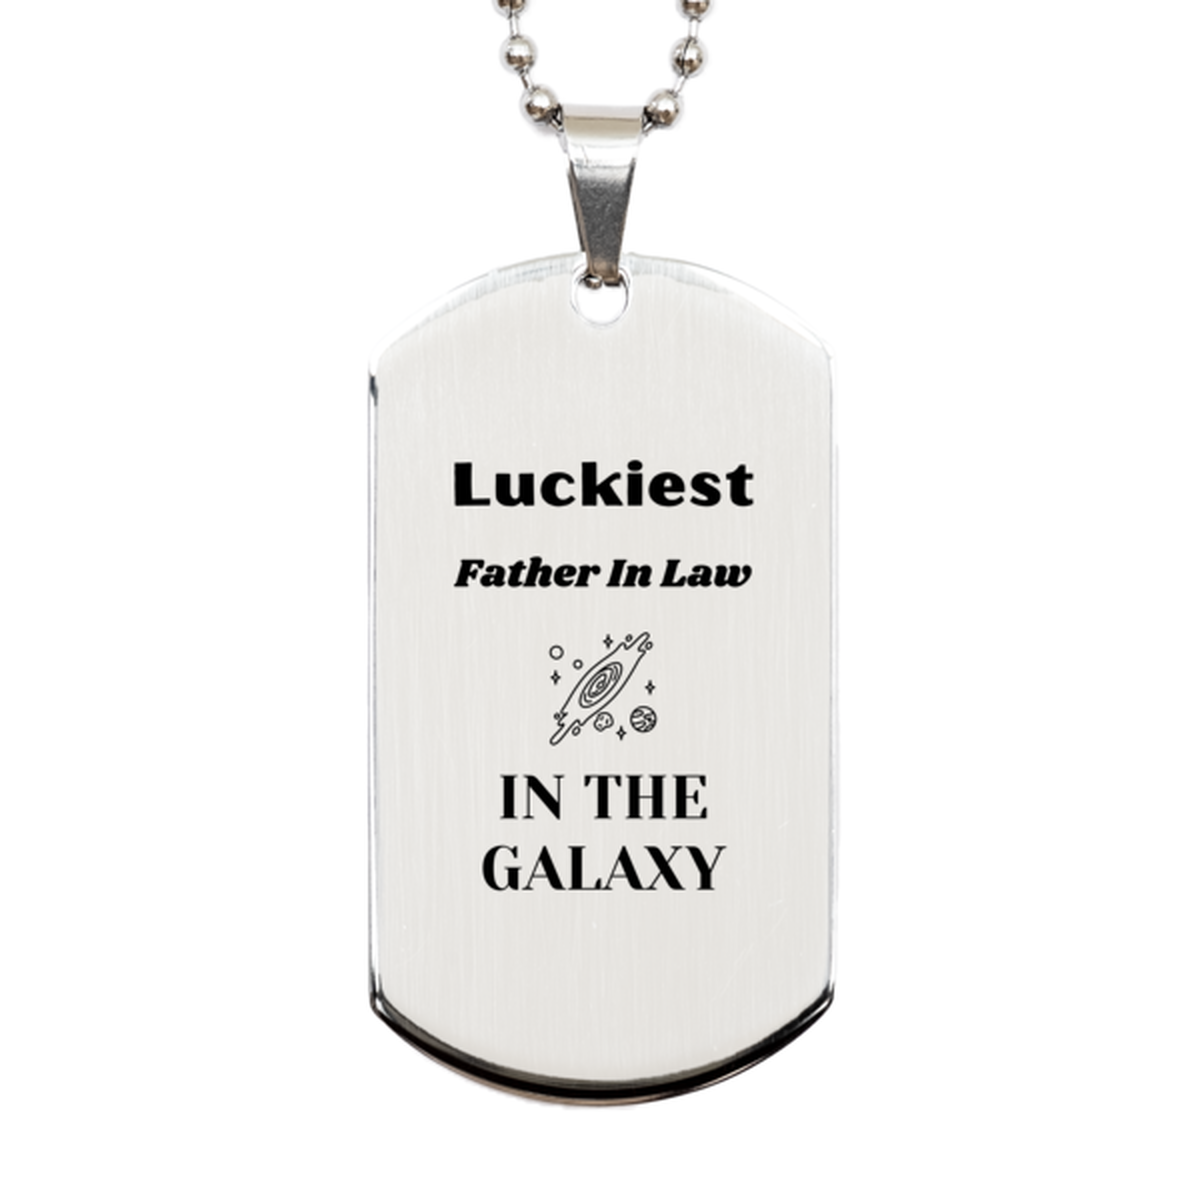 Luckiest Father In Law in the Galaxy, To My Father In Law Engraved Gifts, Christmas Father In Law Silver Dog Tag Gifts, X-mas Birthday Unique Gifts For Father In Law Men Women